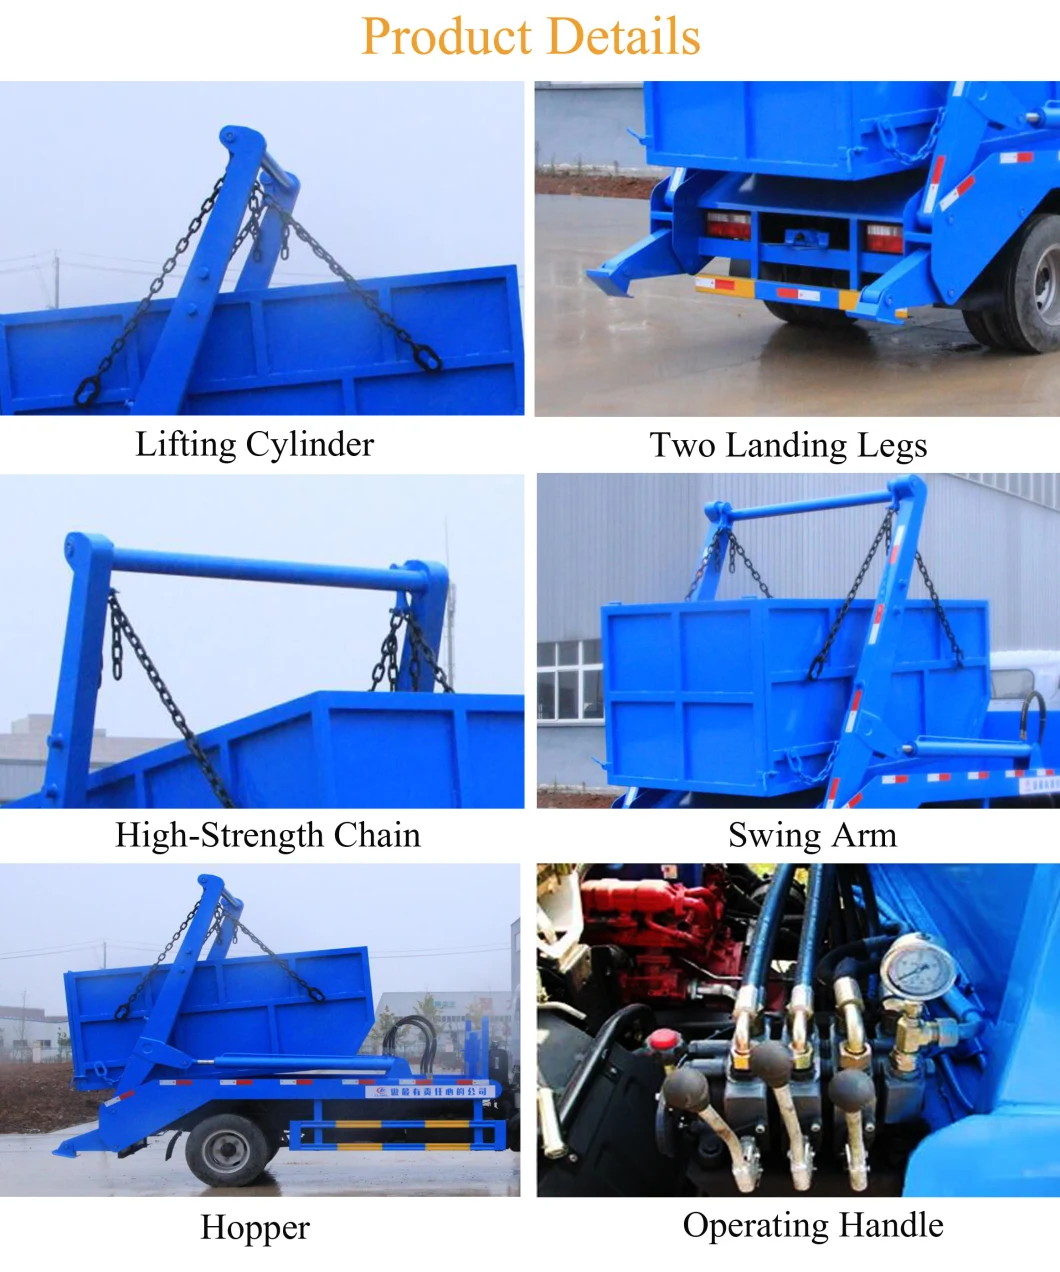 12tons 10-Wheel Waste Collector Vehicle Dongfeng 18cbm Back Loading Rubbish Compactor Truck